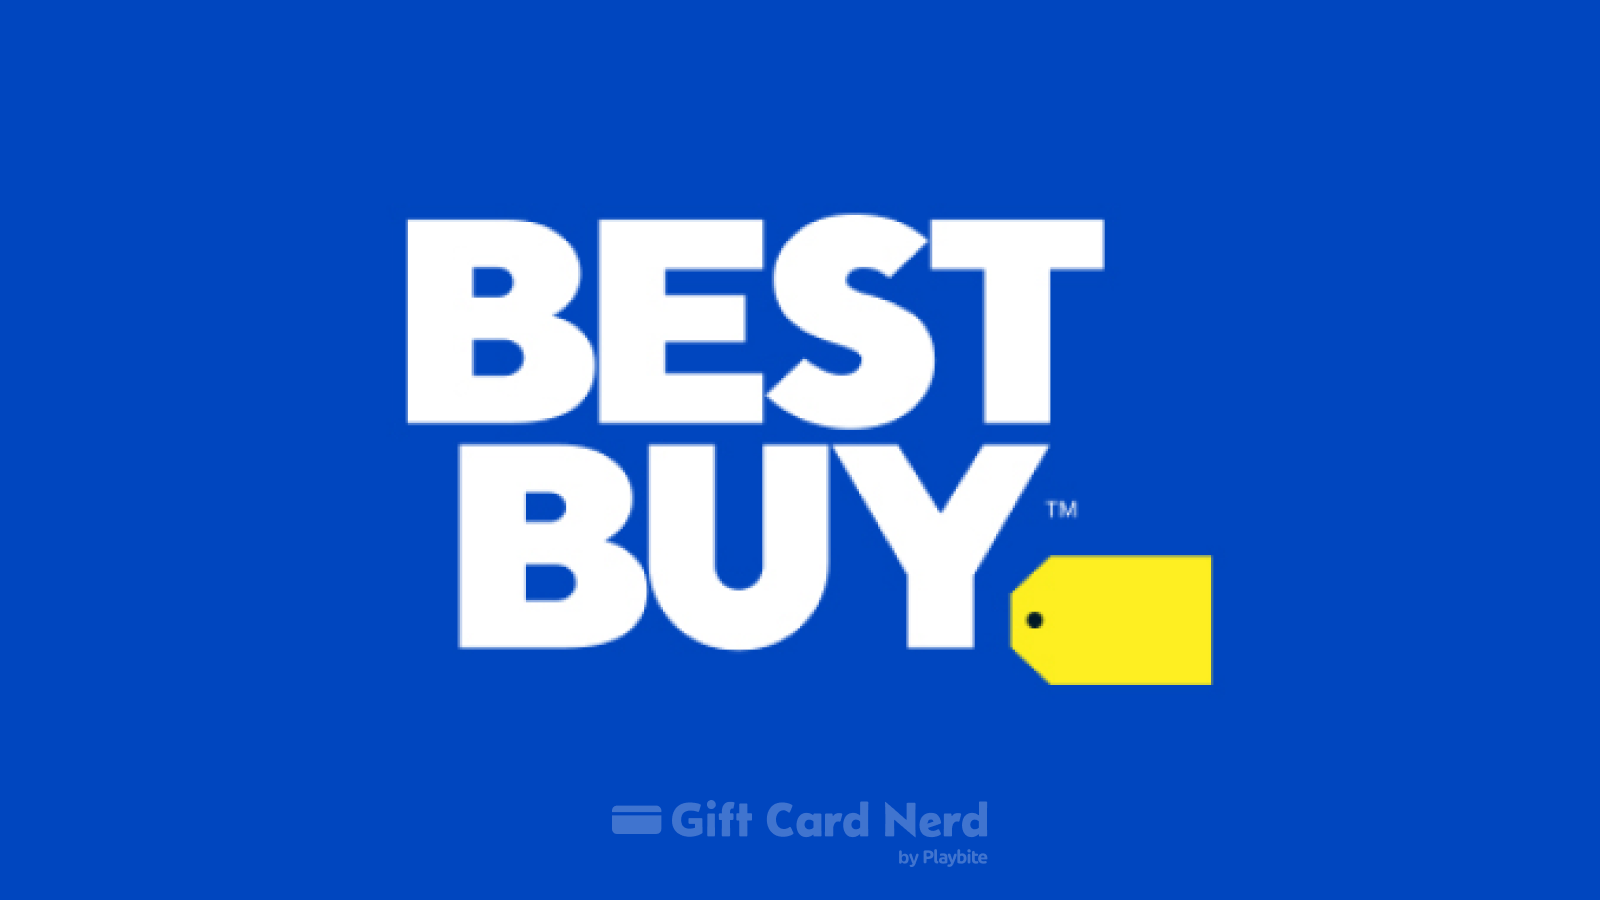 Does Amazon Sell Best Buy Gift Cards?